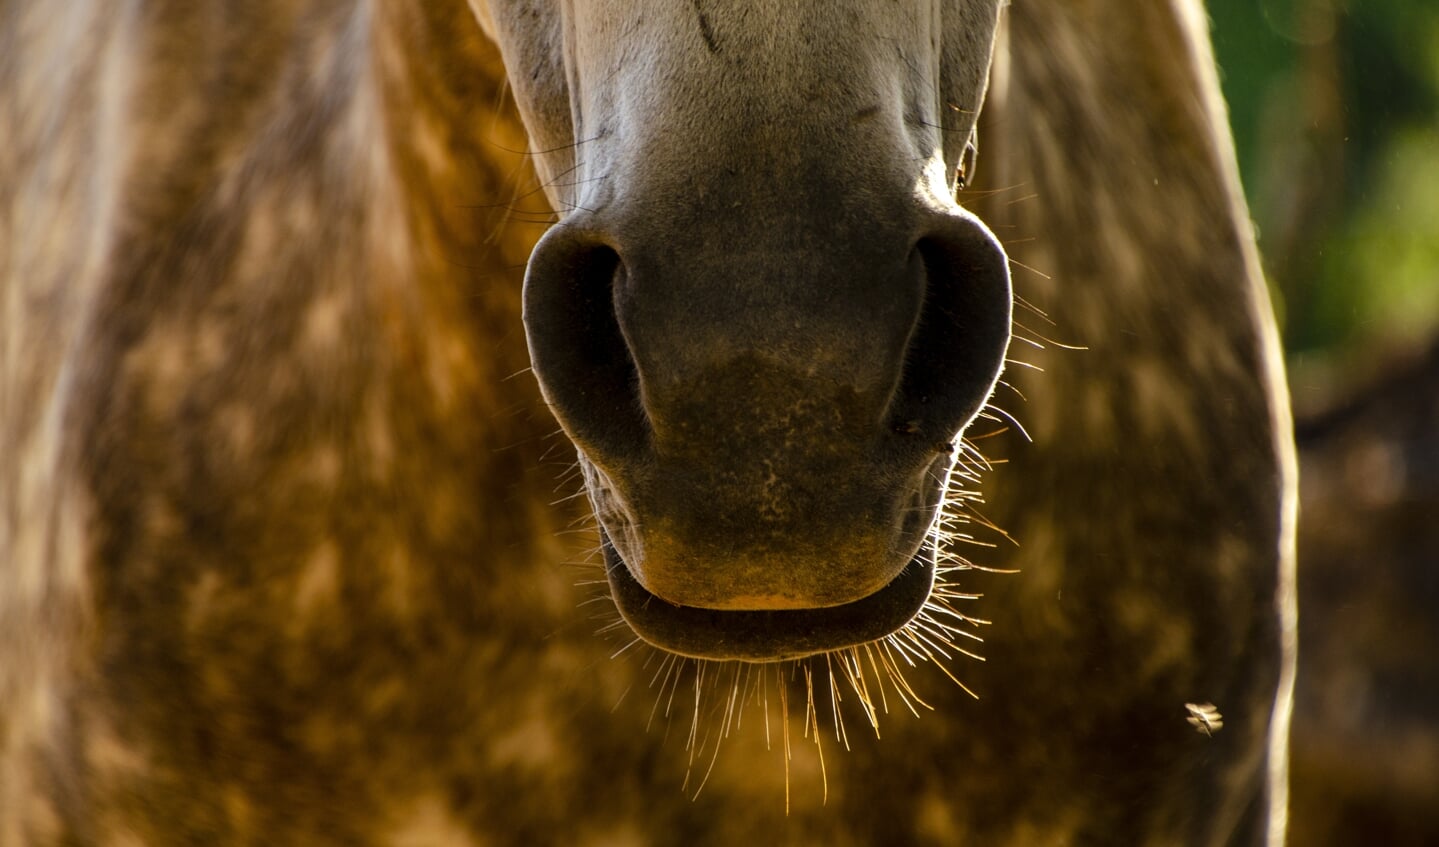 A close-up of a horse mouth and nose